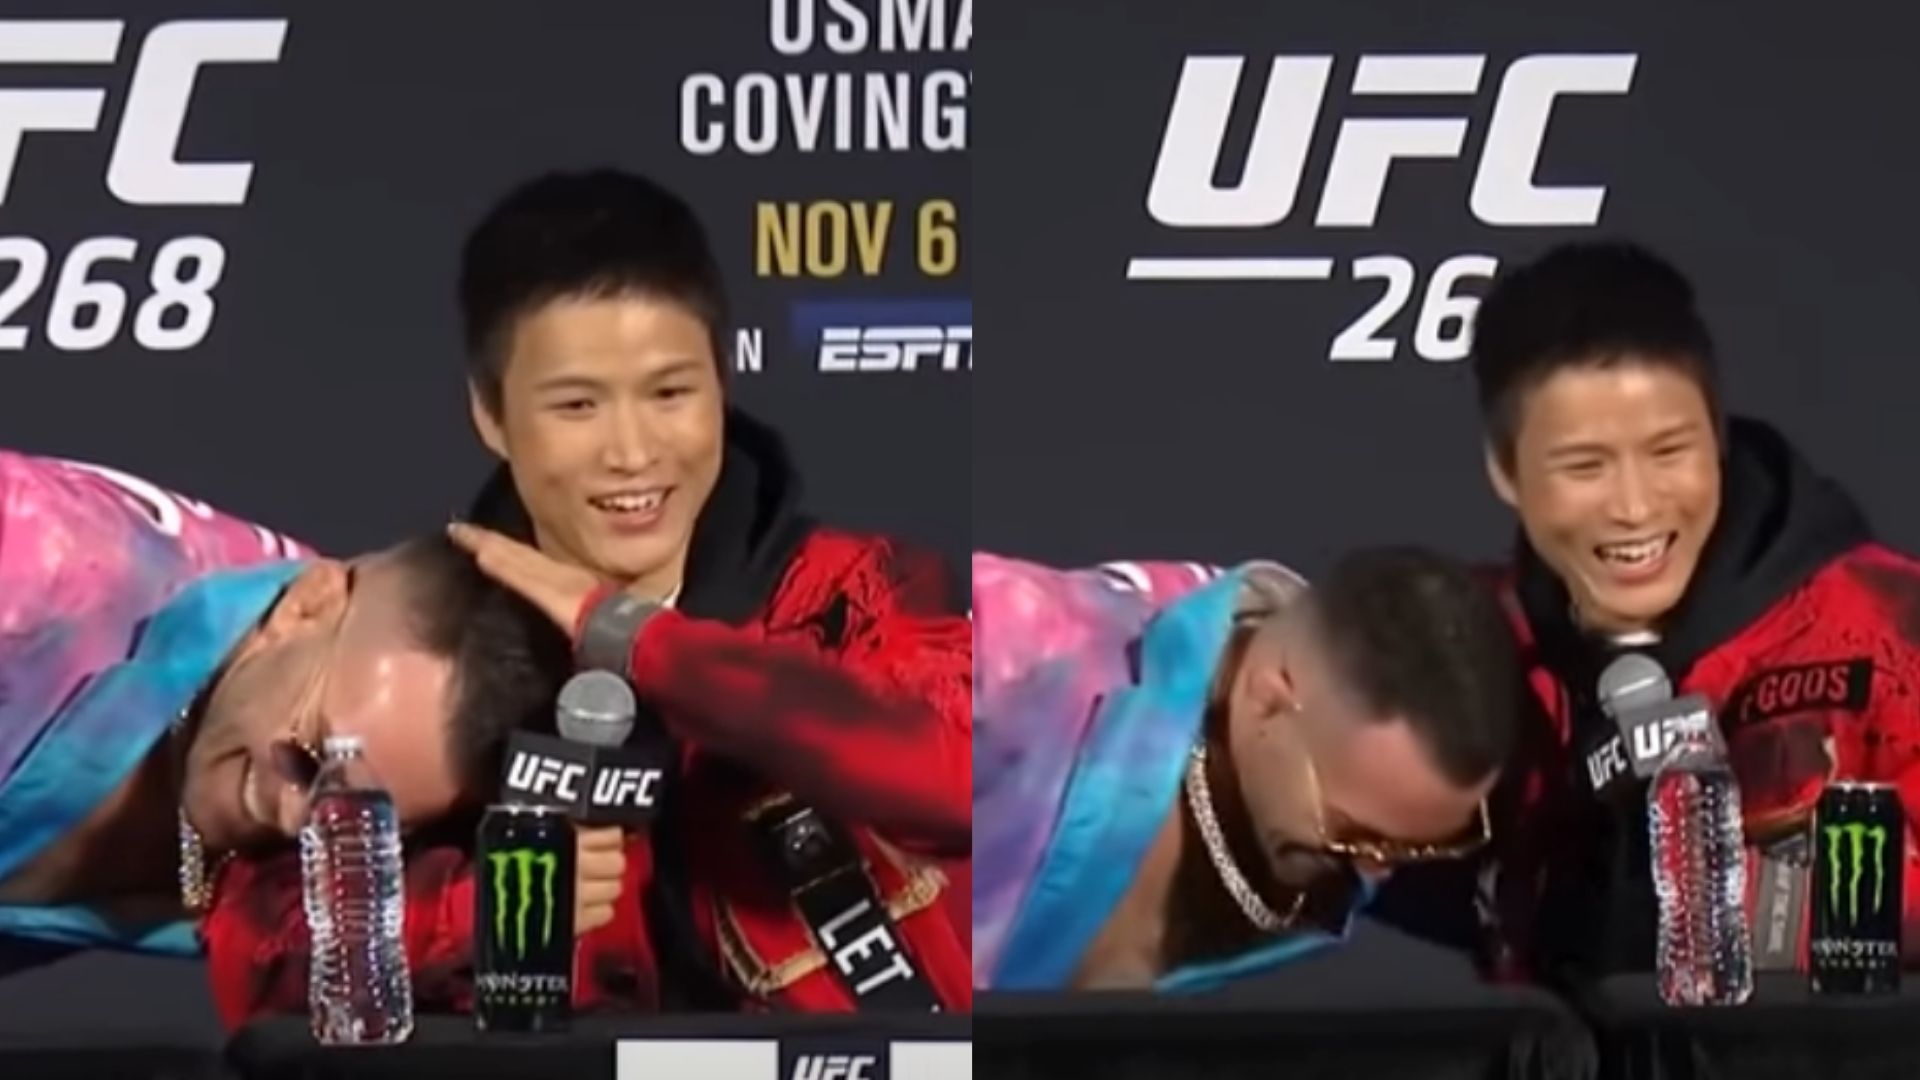 Colby-Covington-and-Zhang-Weili-embrace-each-other-during-UFC-268-press-conference.jpg